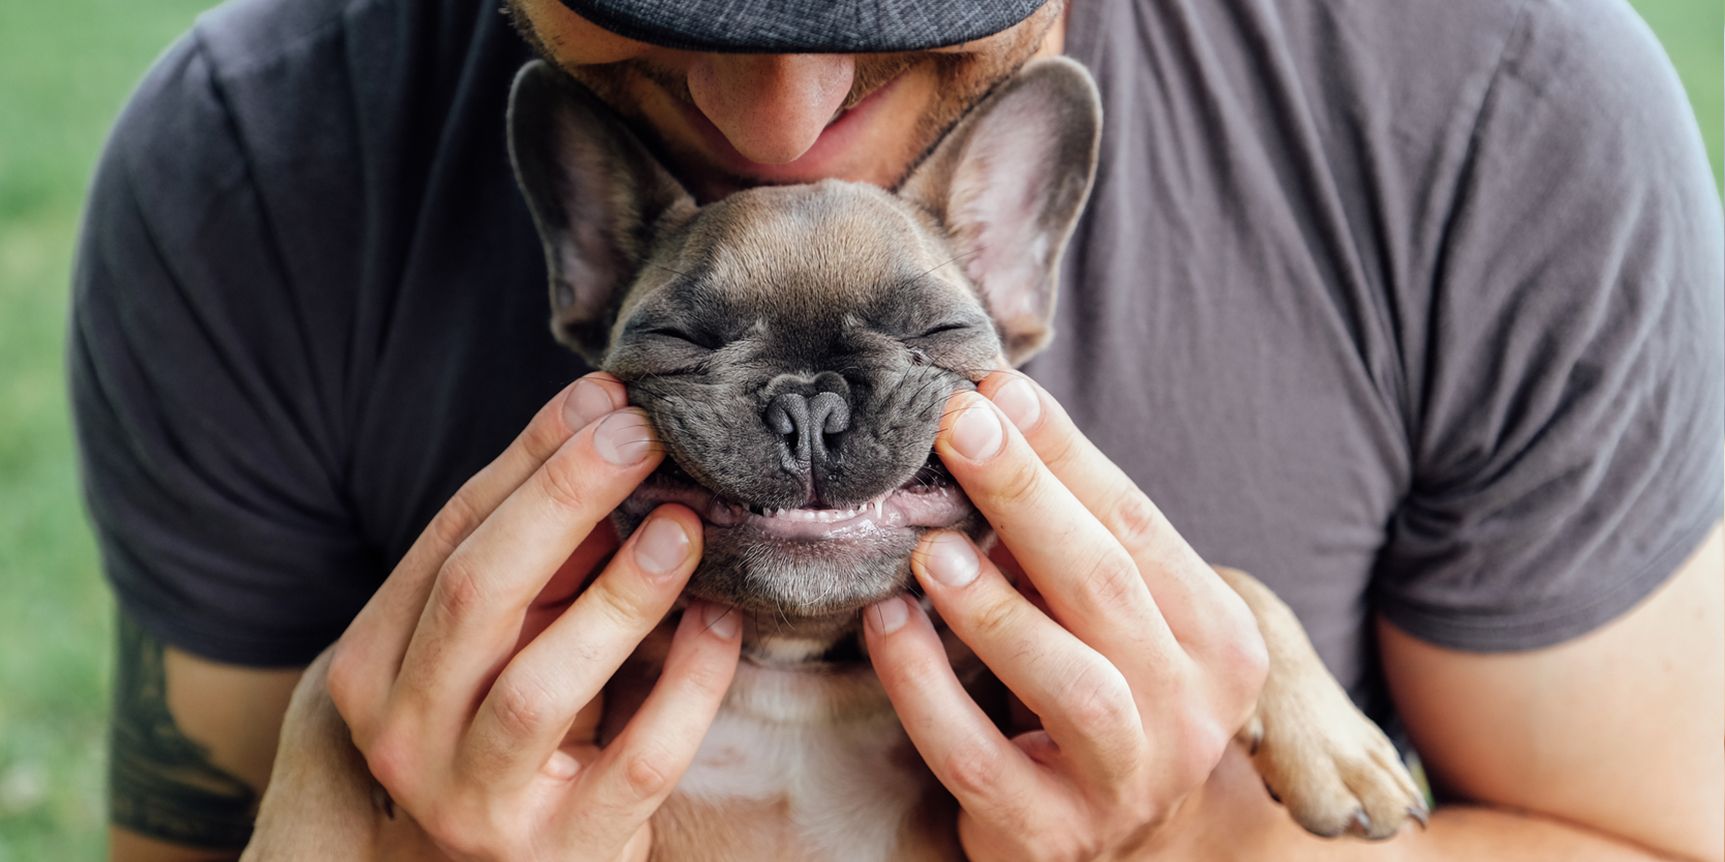 The 19 Best Gifts for Dogs and Dog Lovers for 2024